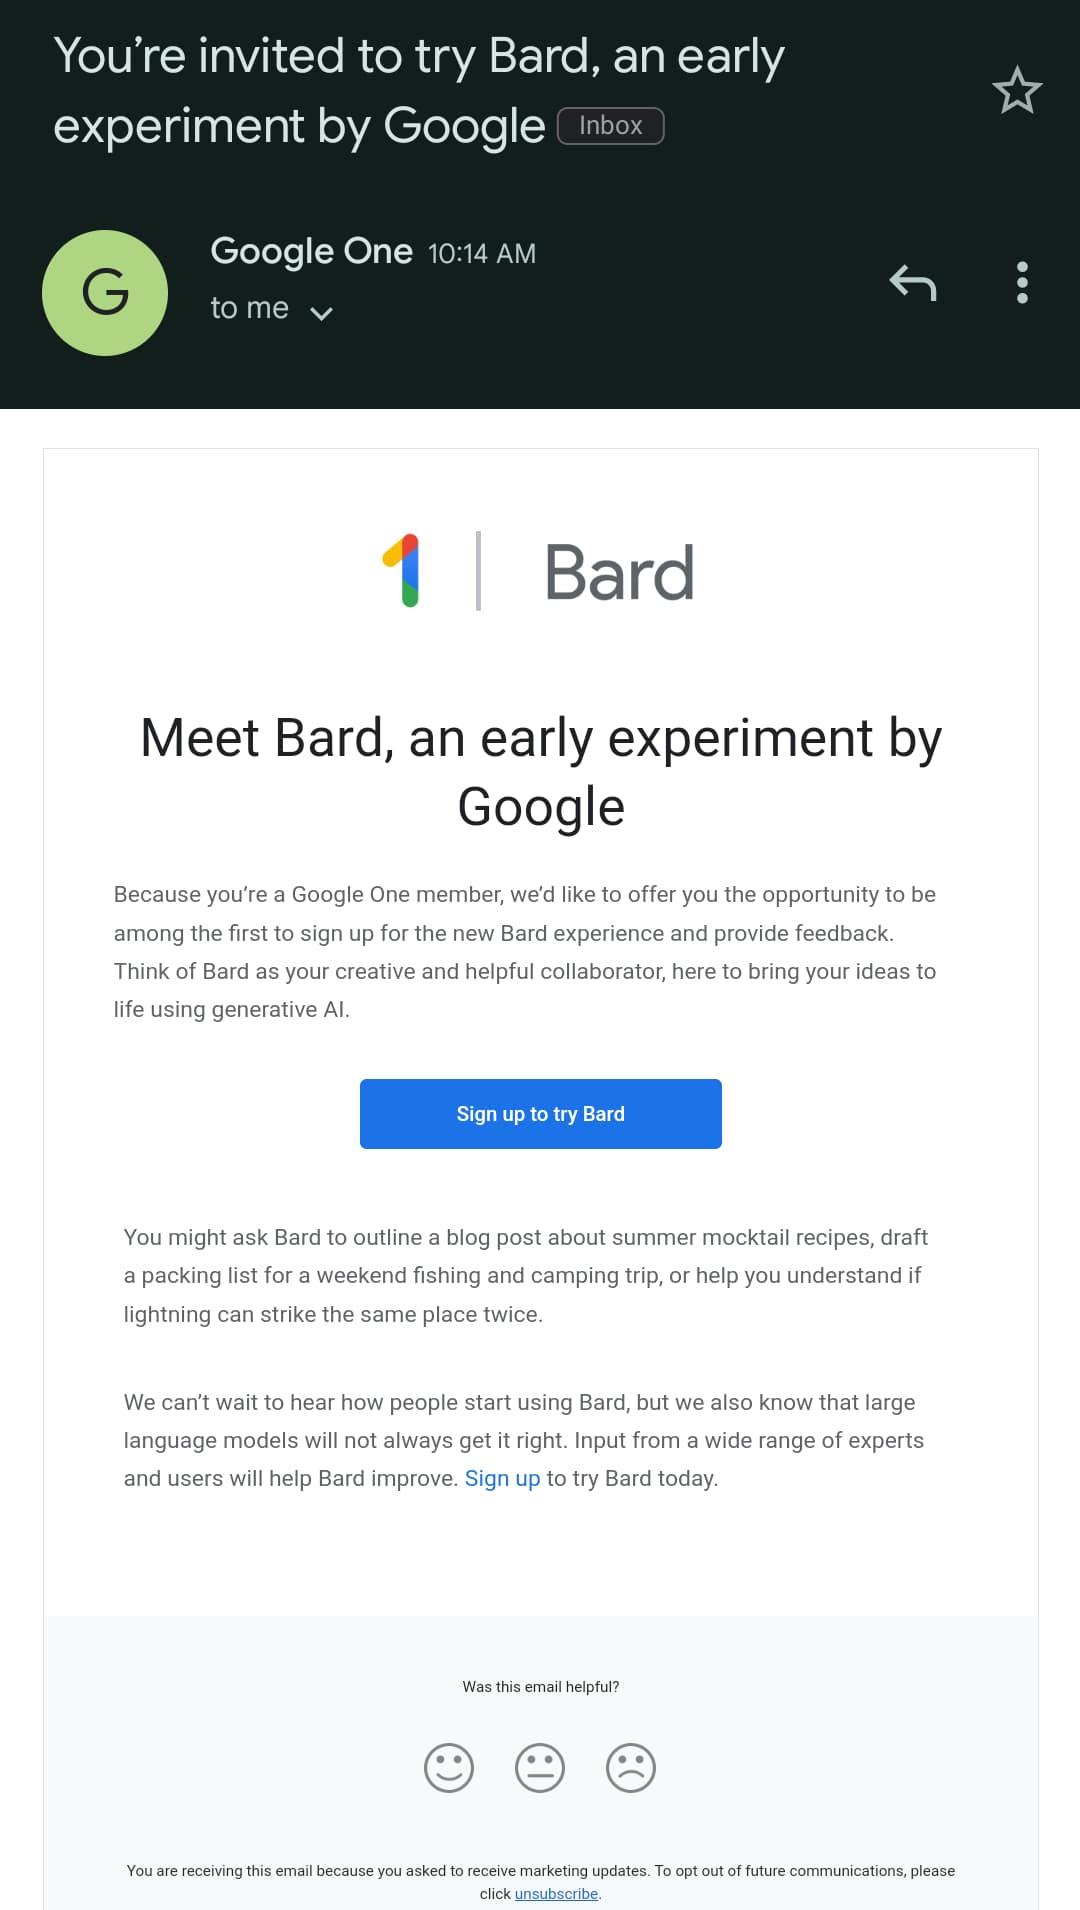 Google tapping the Pixel and Nest brands to invite people to Bard